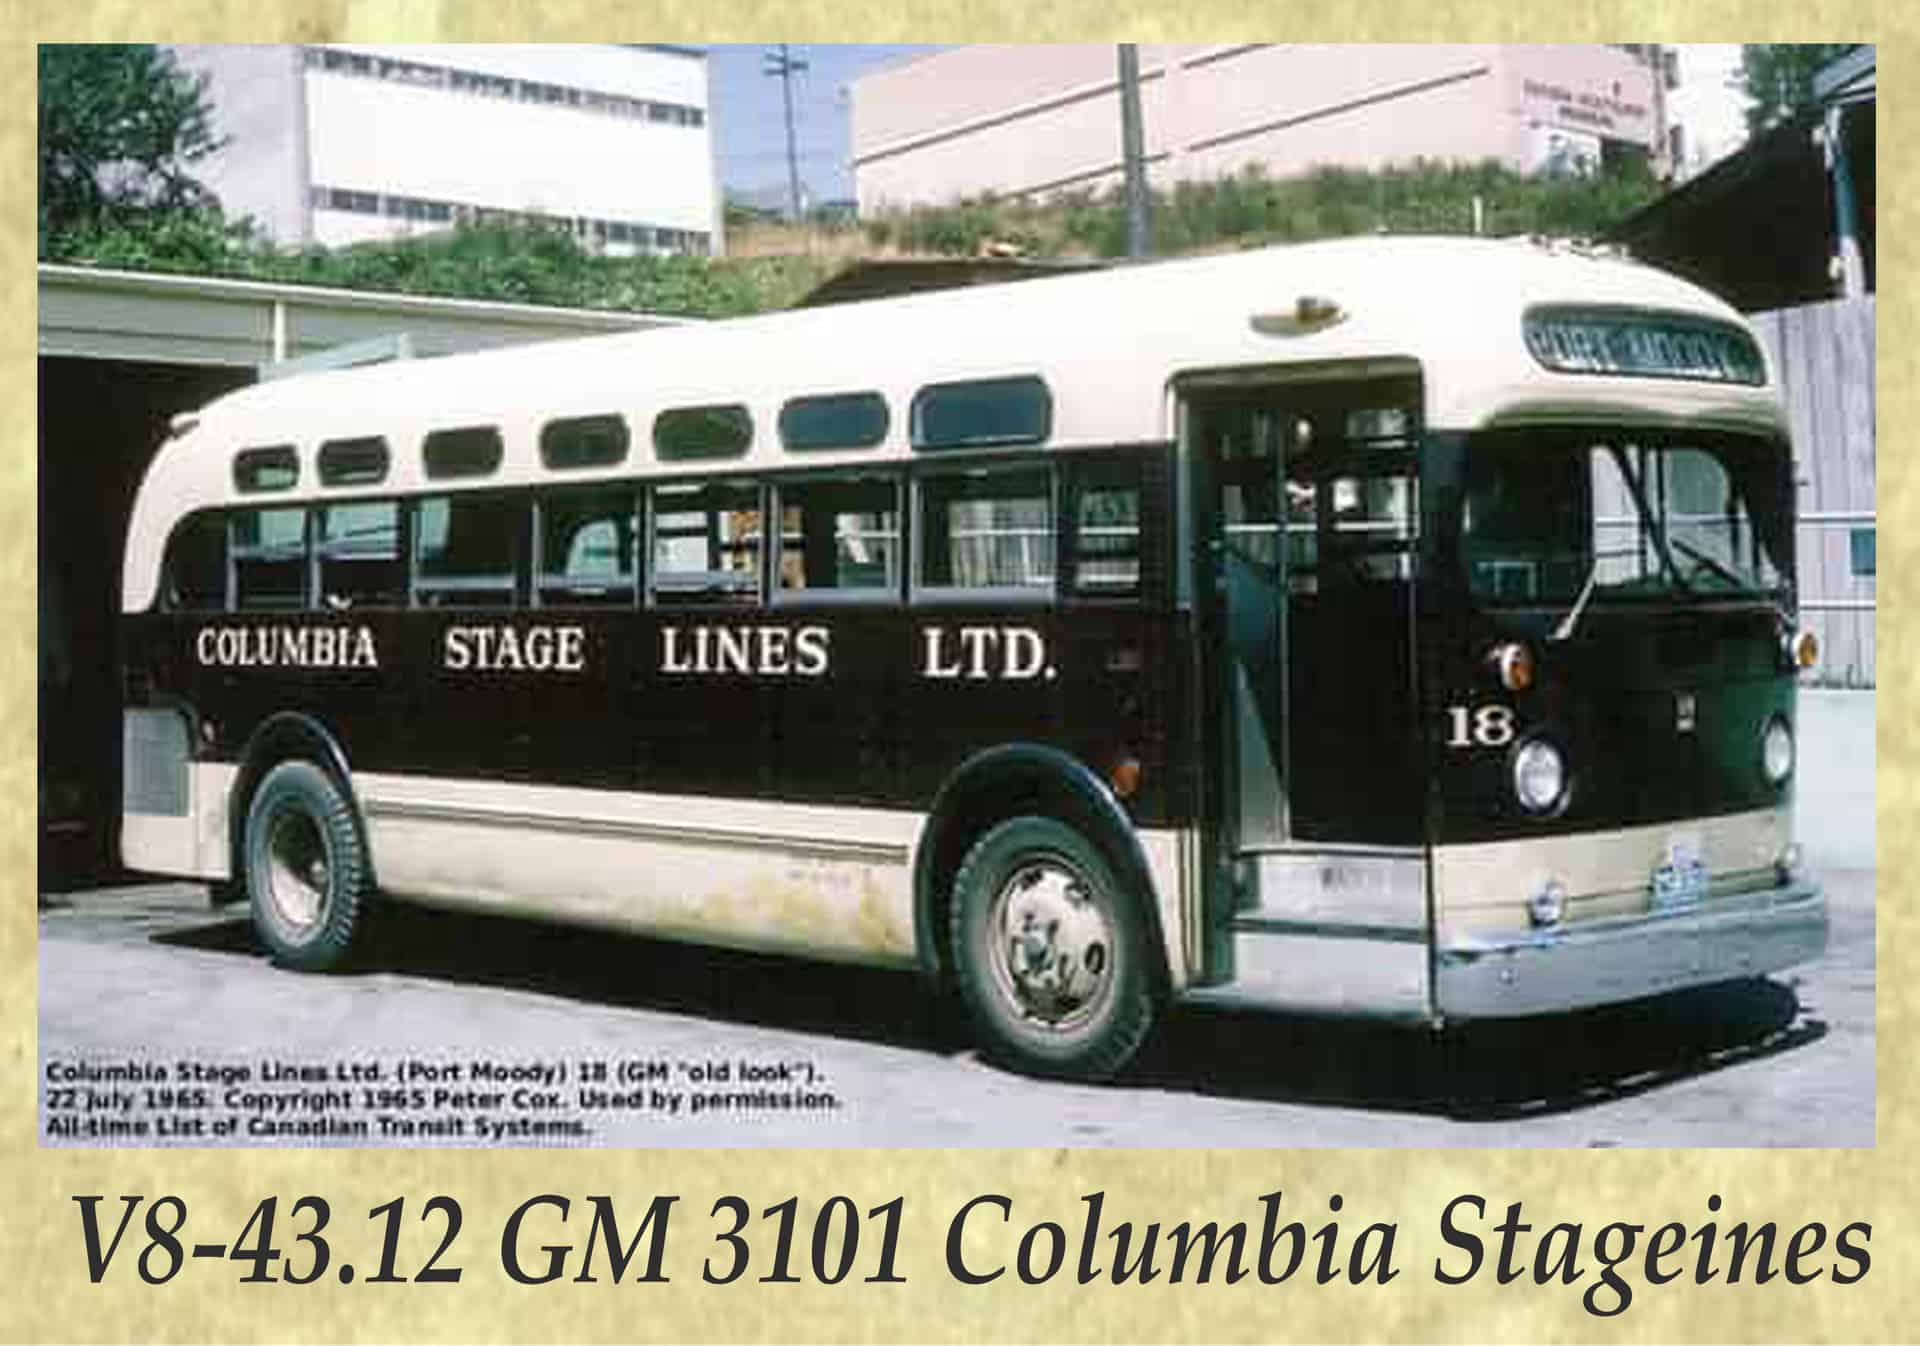 V8-43.12 GM 3101 Columbia Stageines